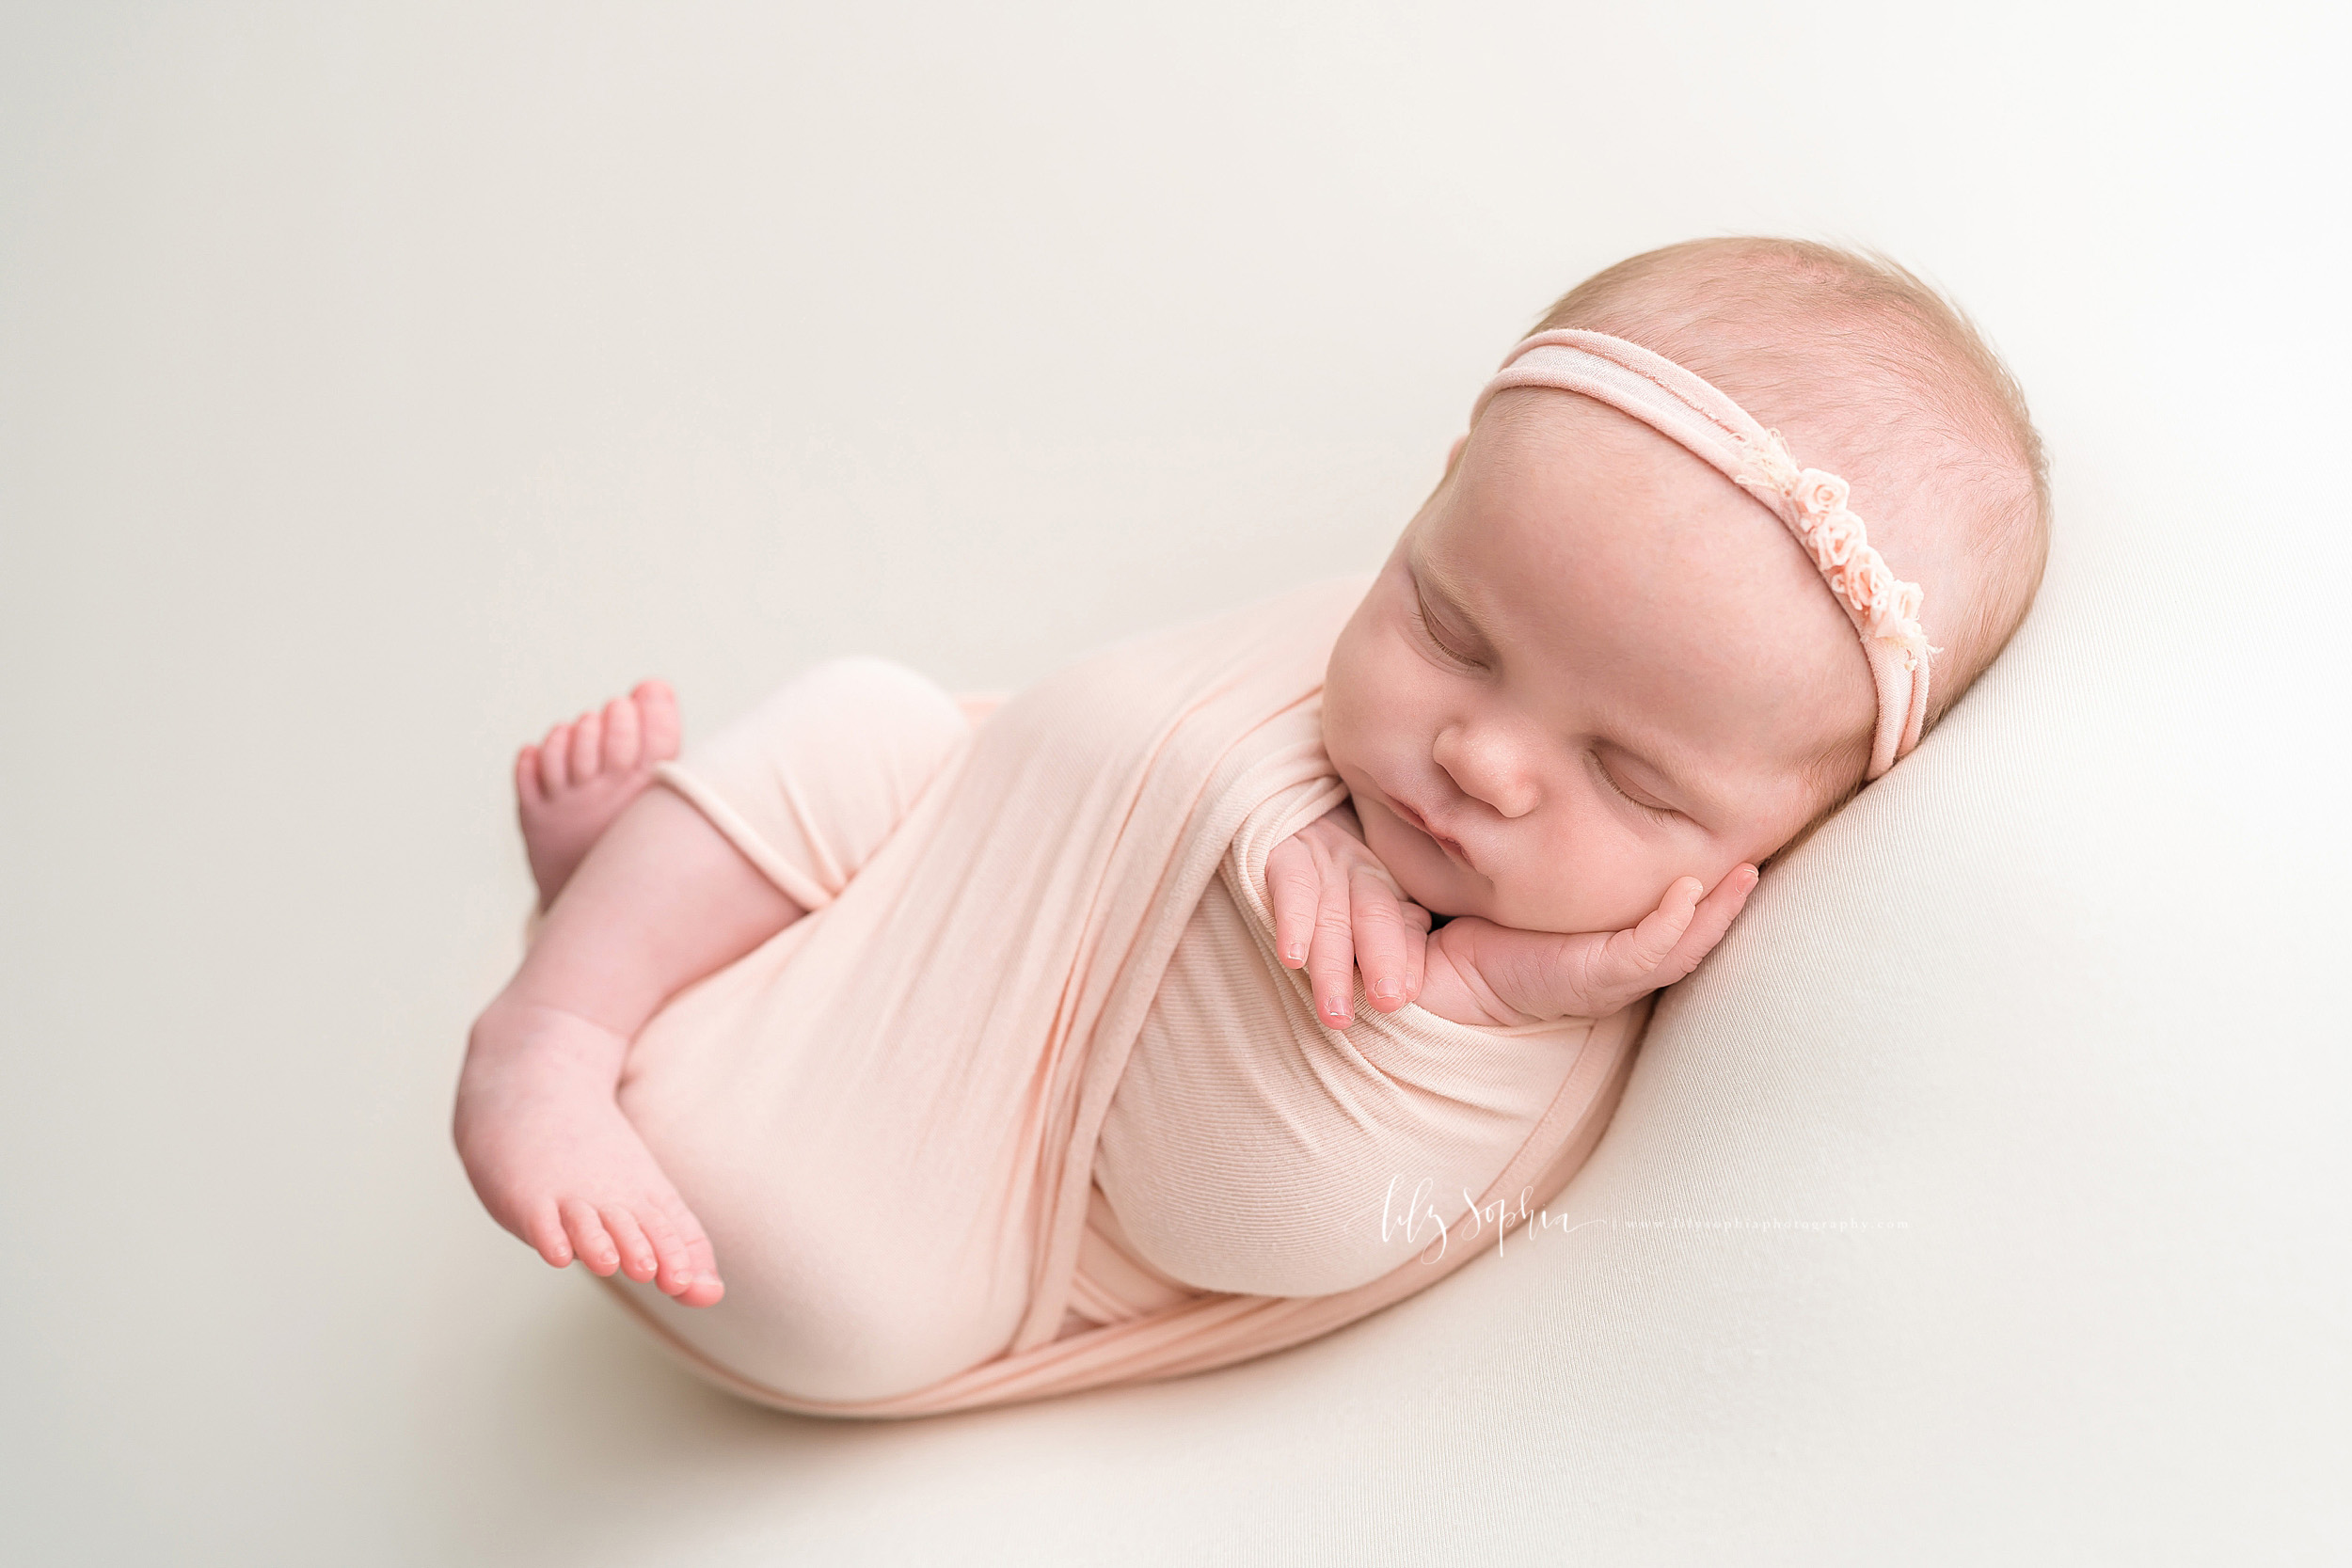  Image of a sleeping infant girl wrapped in a knit pale pink swaddle.  Her legs are bent and her feet are sticking out the bottom of the swaddle while her little hands are sticking out the top.  Her left hand is open and resting on her cheek.  She is